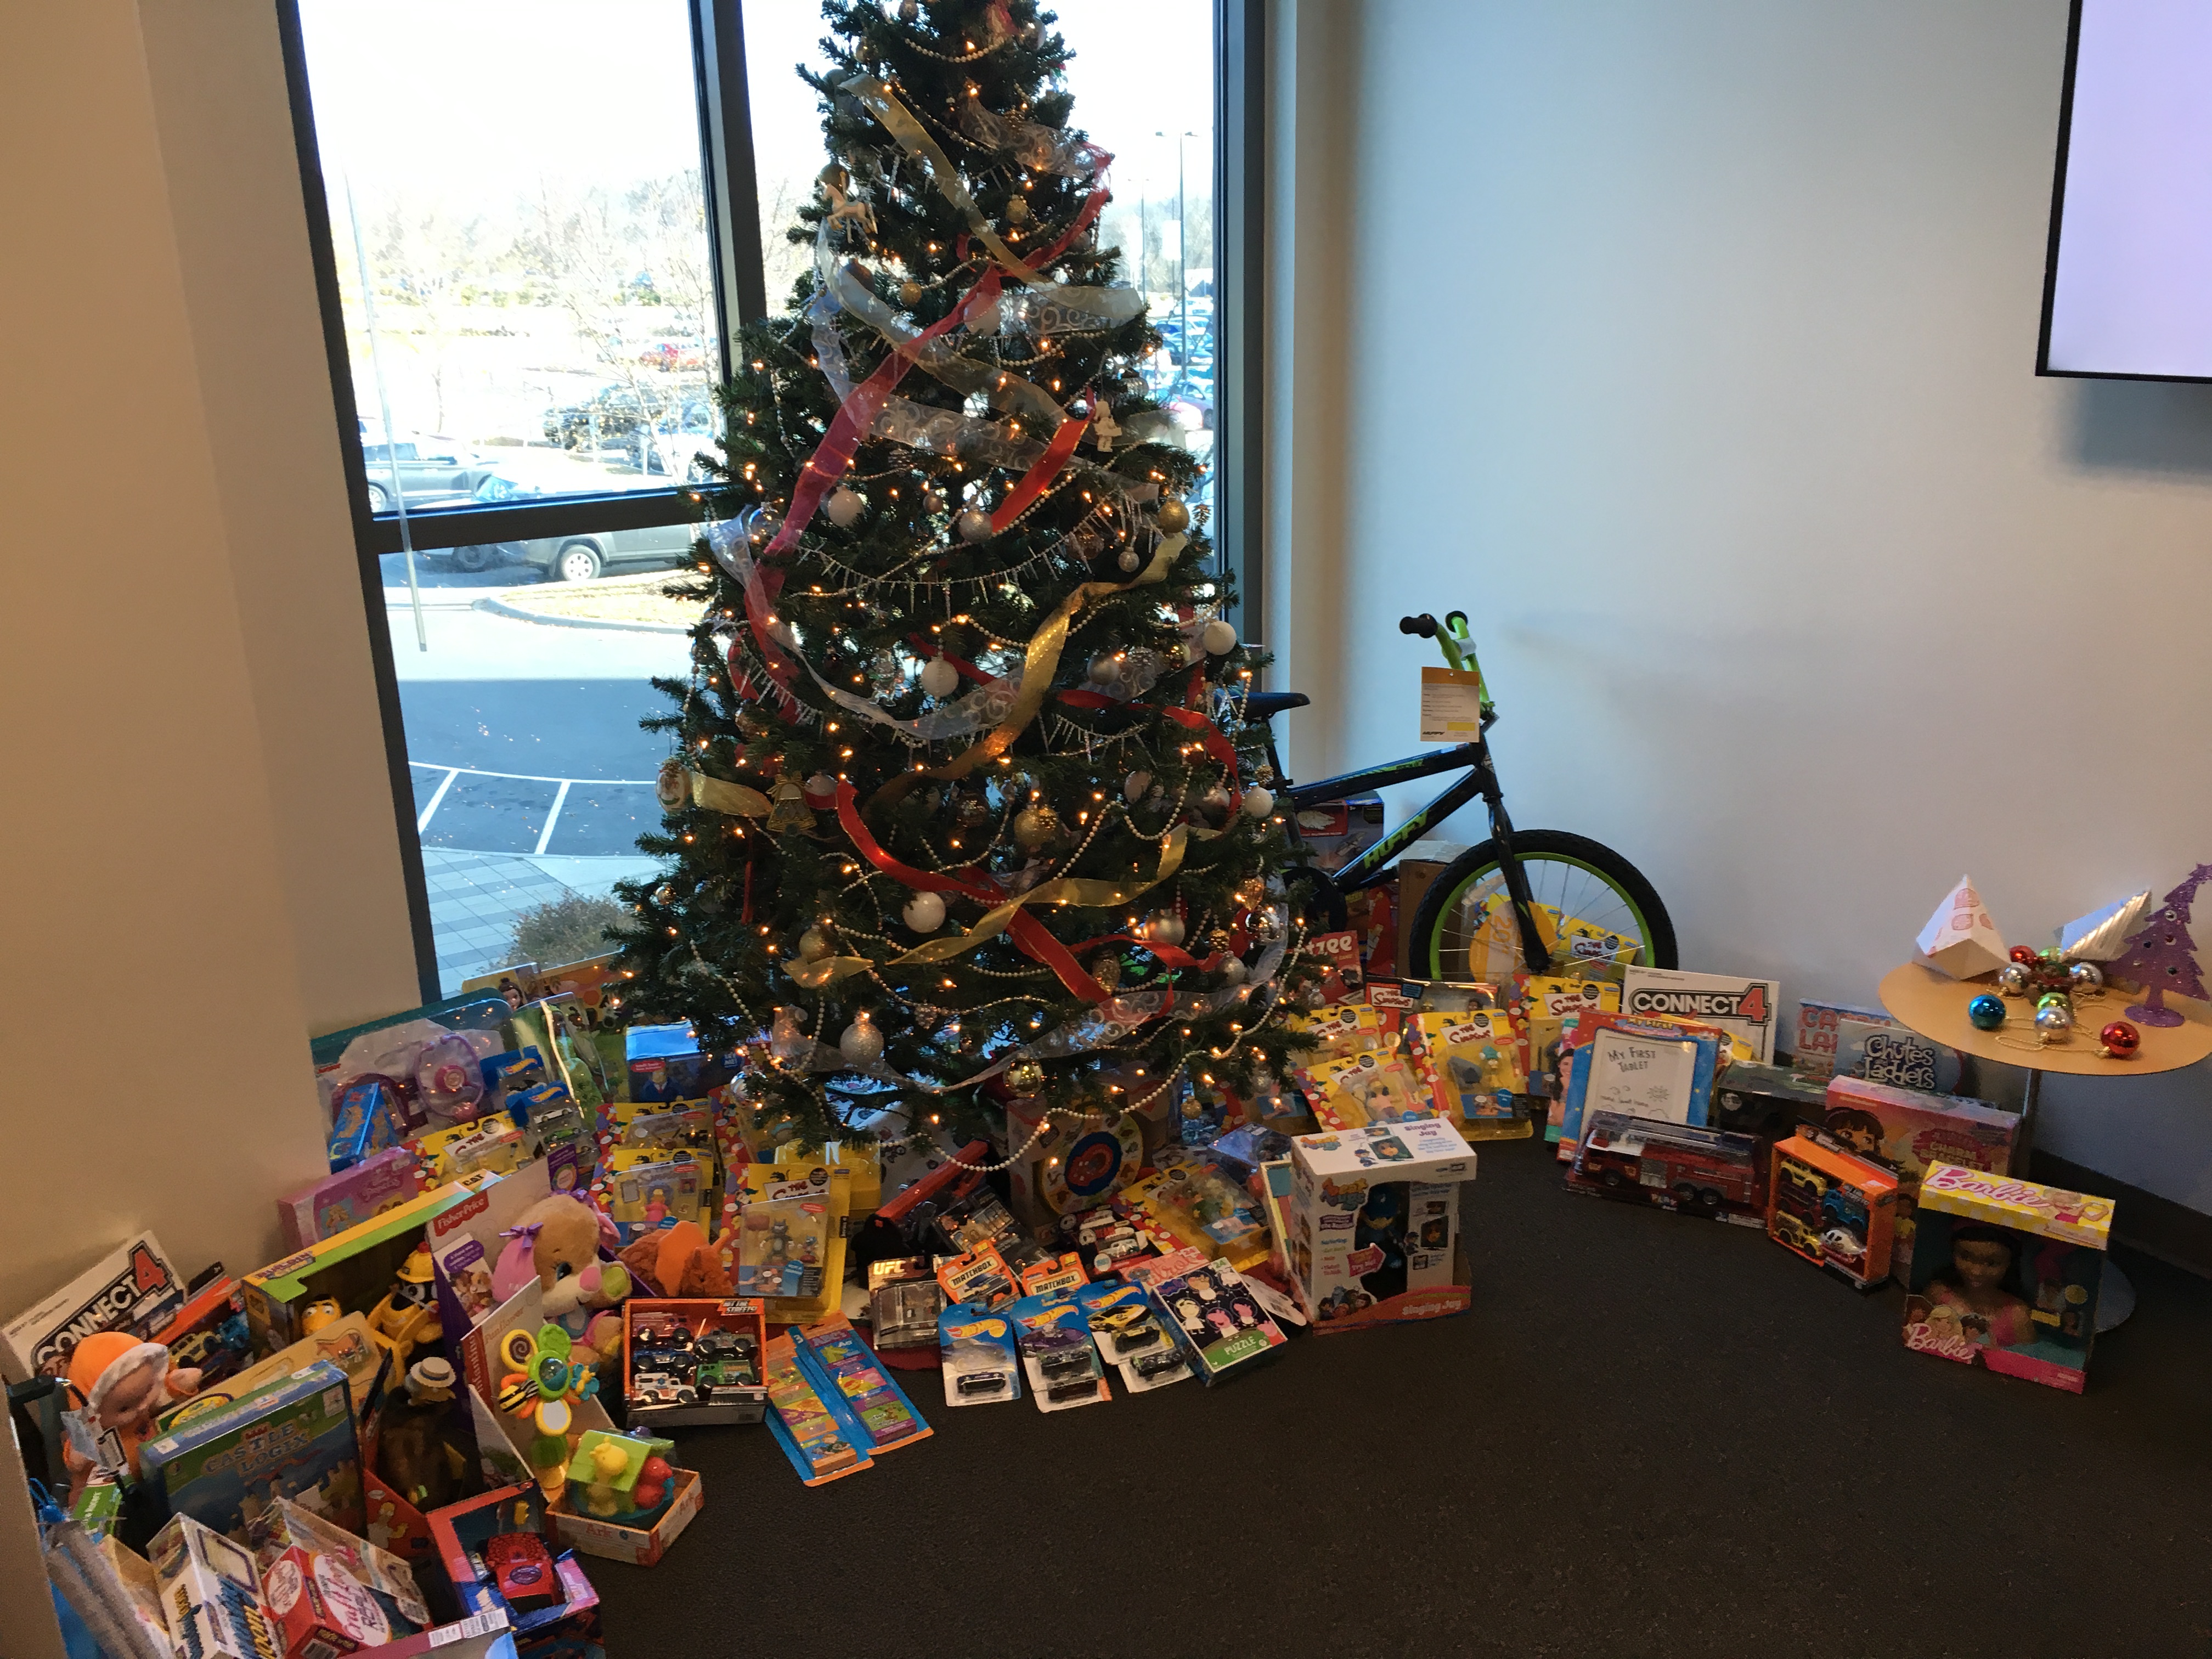 Mecklenburg County employees collect gifts for Toys for Tots.